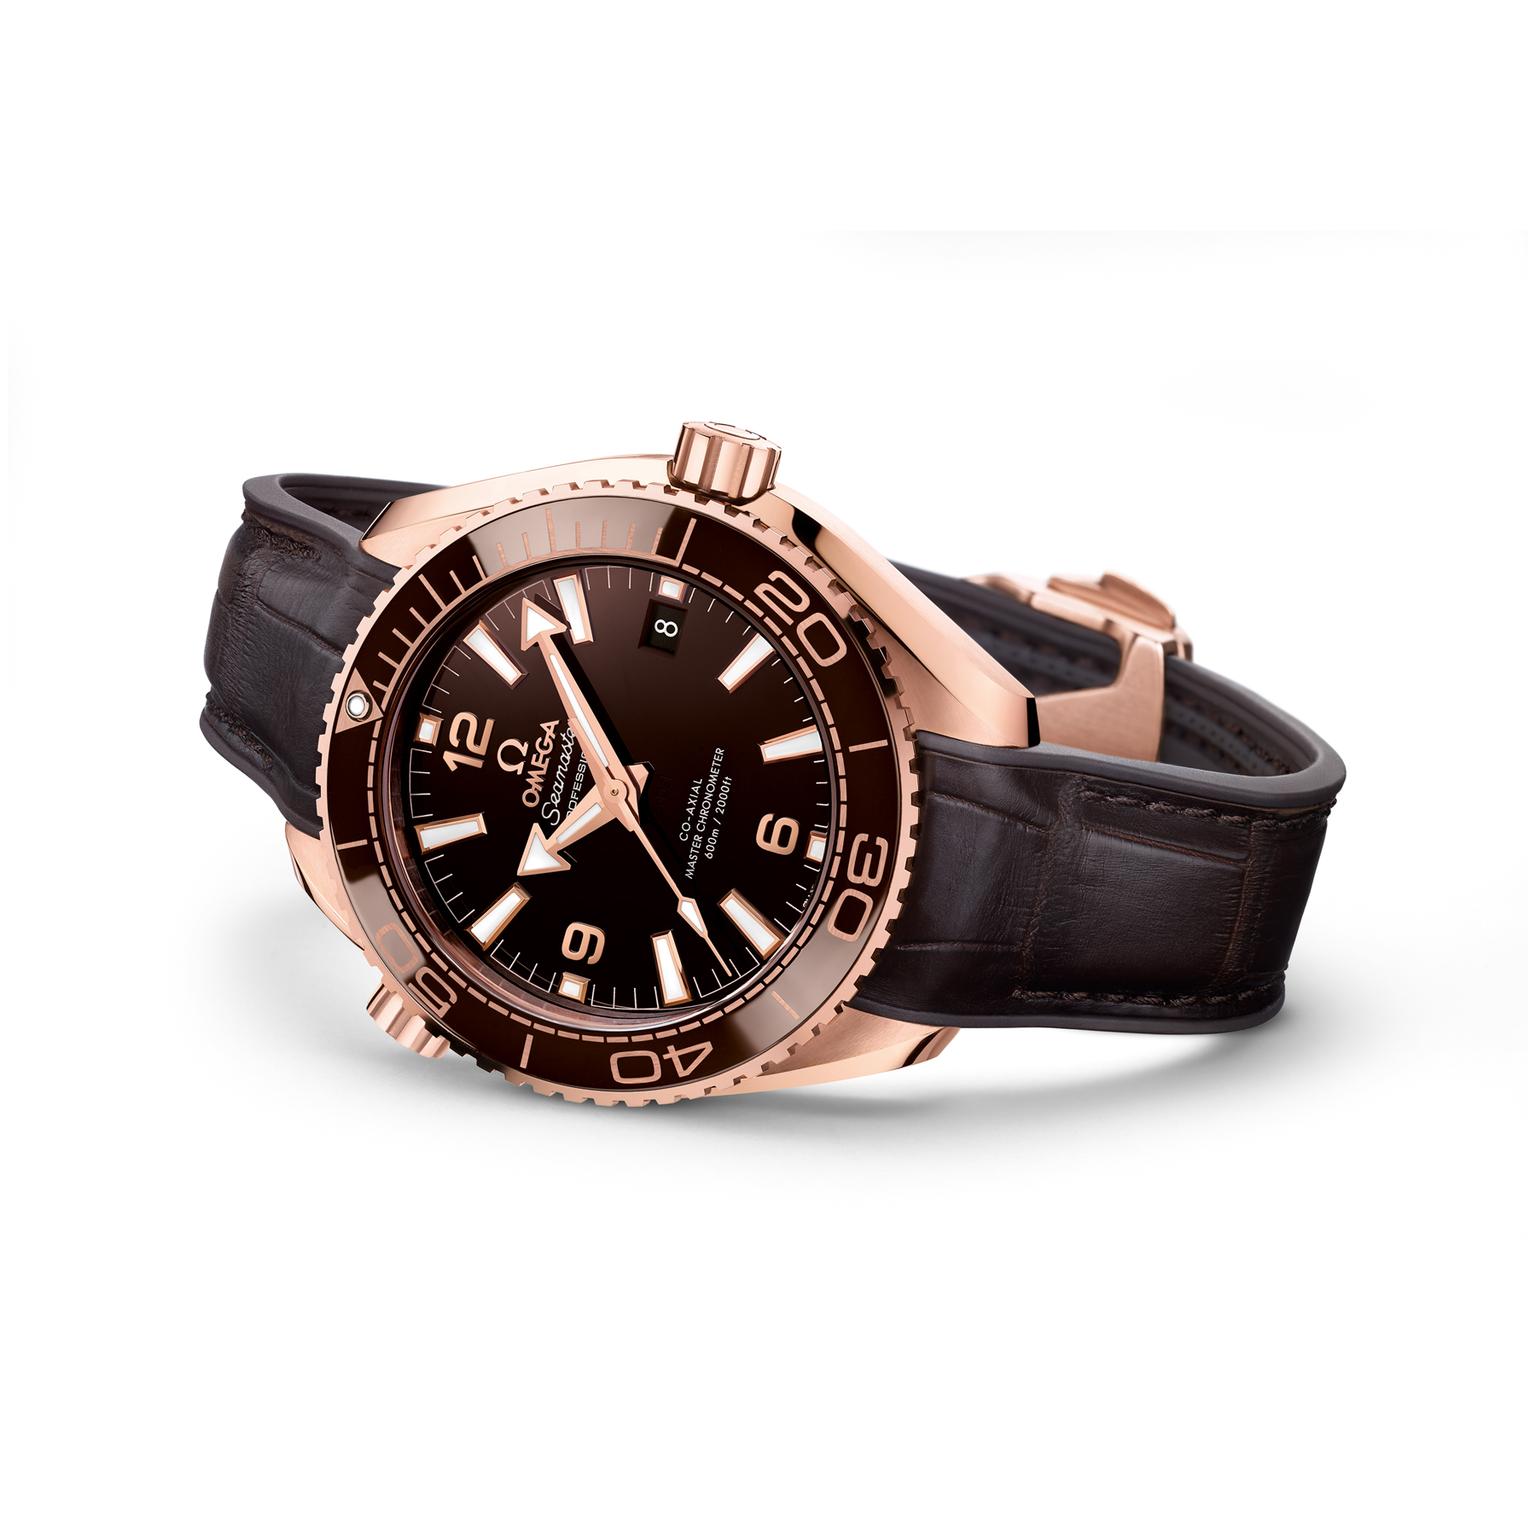 Omega Seamaster Planet Ocean watch in Sedna gold